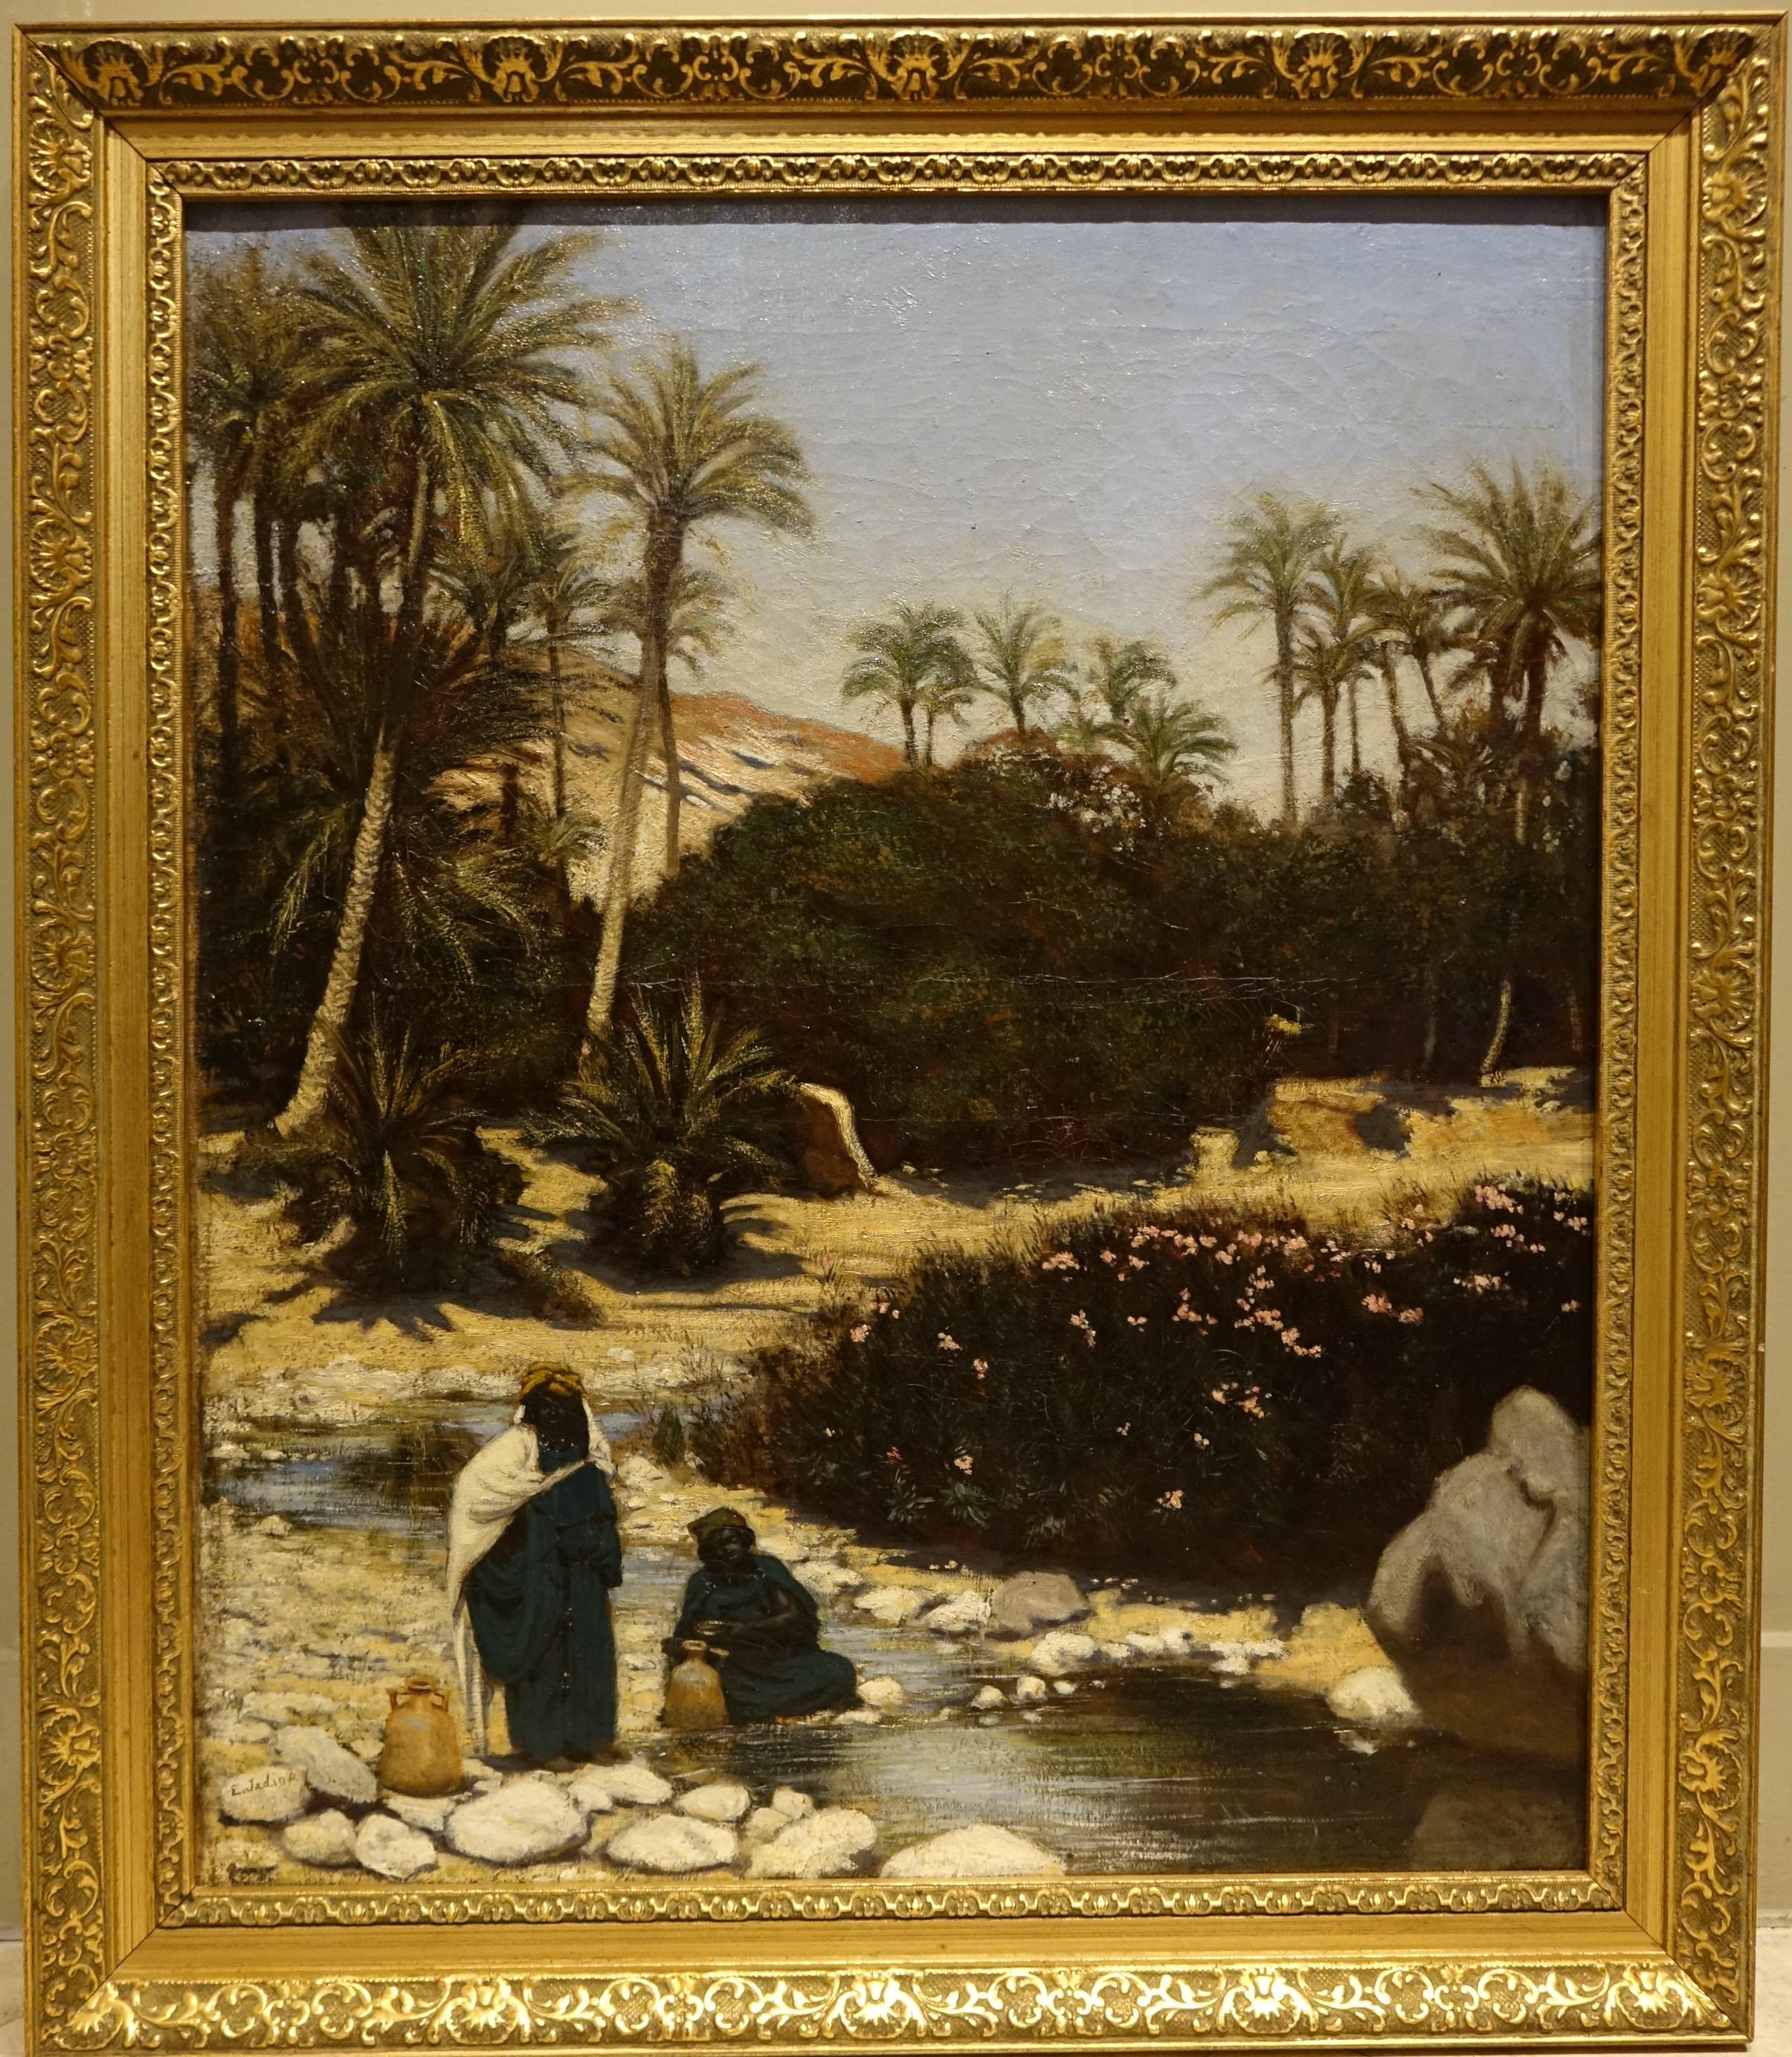 Two Bedouins at the bank of a wadi, probably in Algeria. 
Oil on canvas signed lower left JADIN.,72 
Charles Emmanuel JADIN, painter born in Paris in 1843, made the trip to North Africa, like many of his colleagues at the time. 
Son of Louis Jadin,